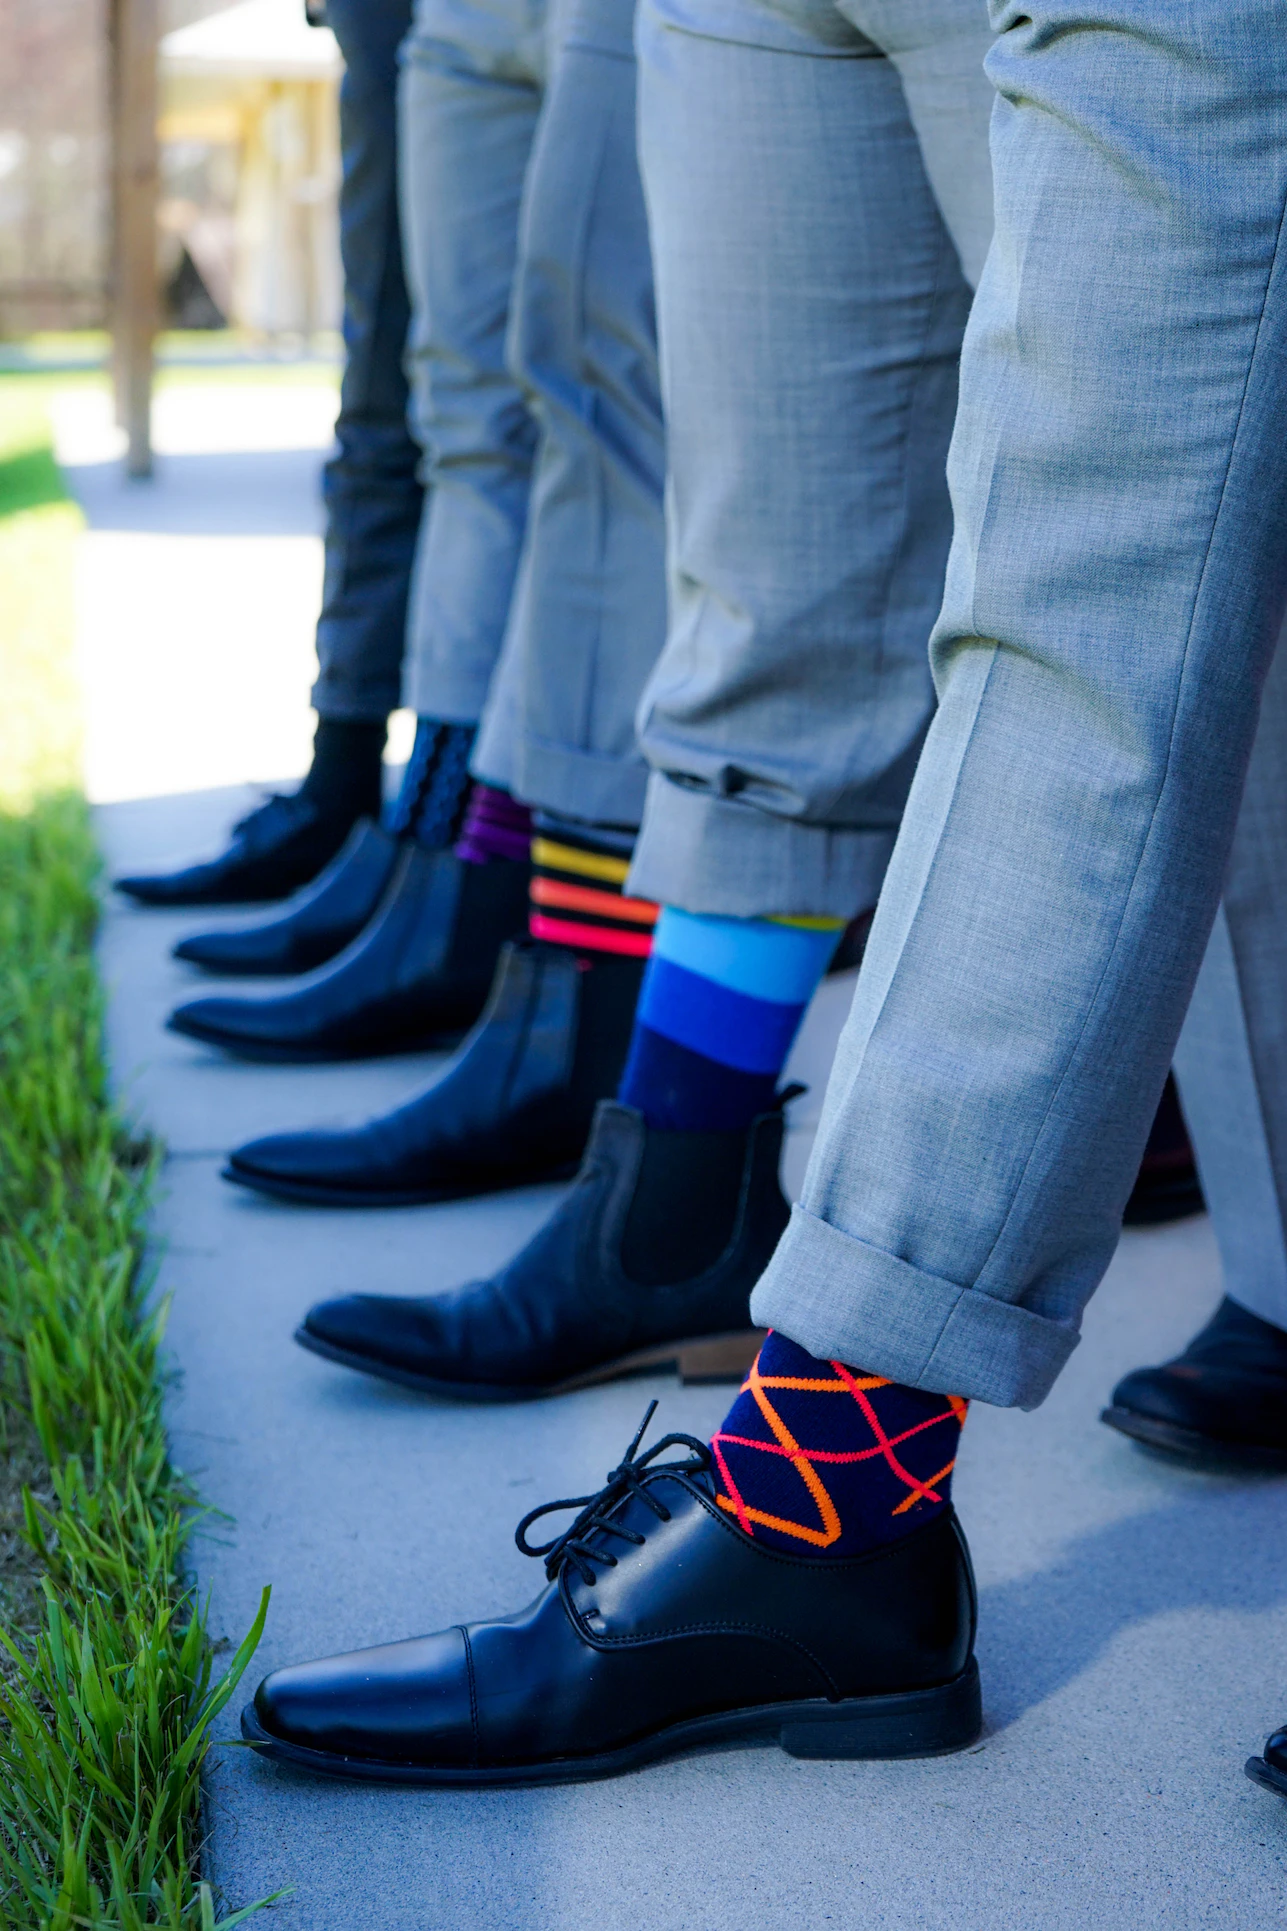 The Benefits Of Wearing Compression Socks